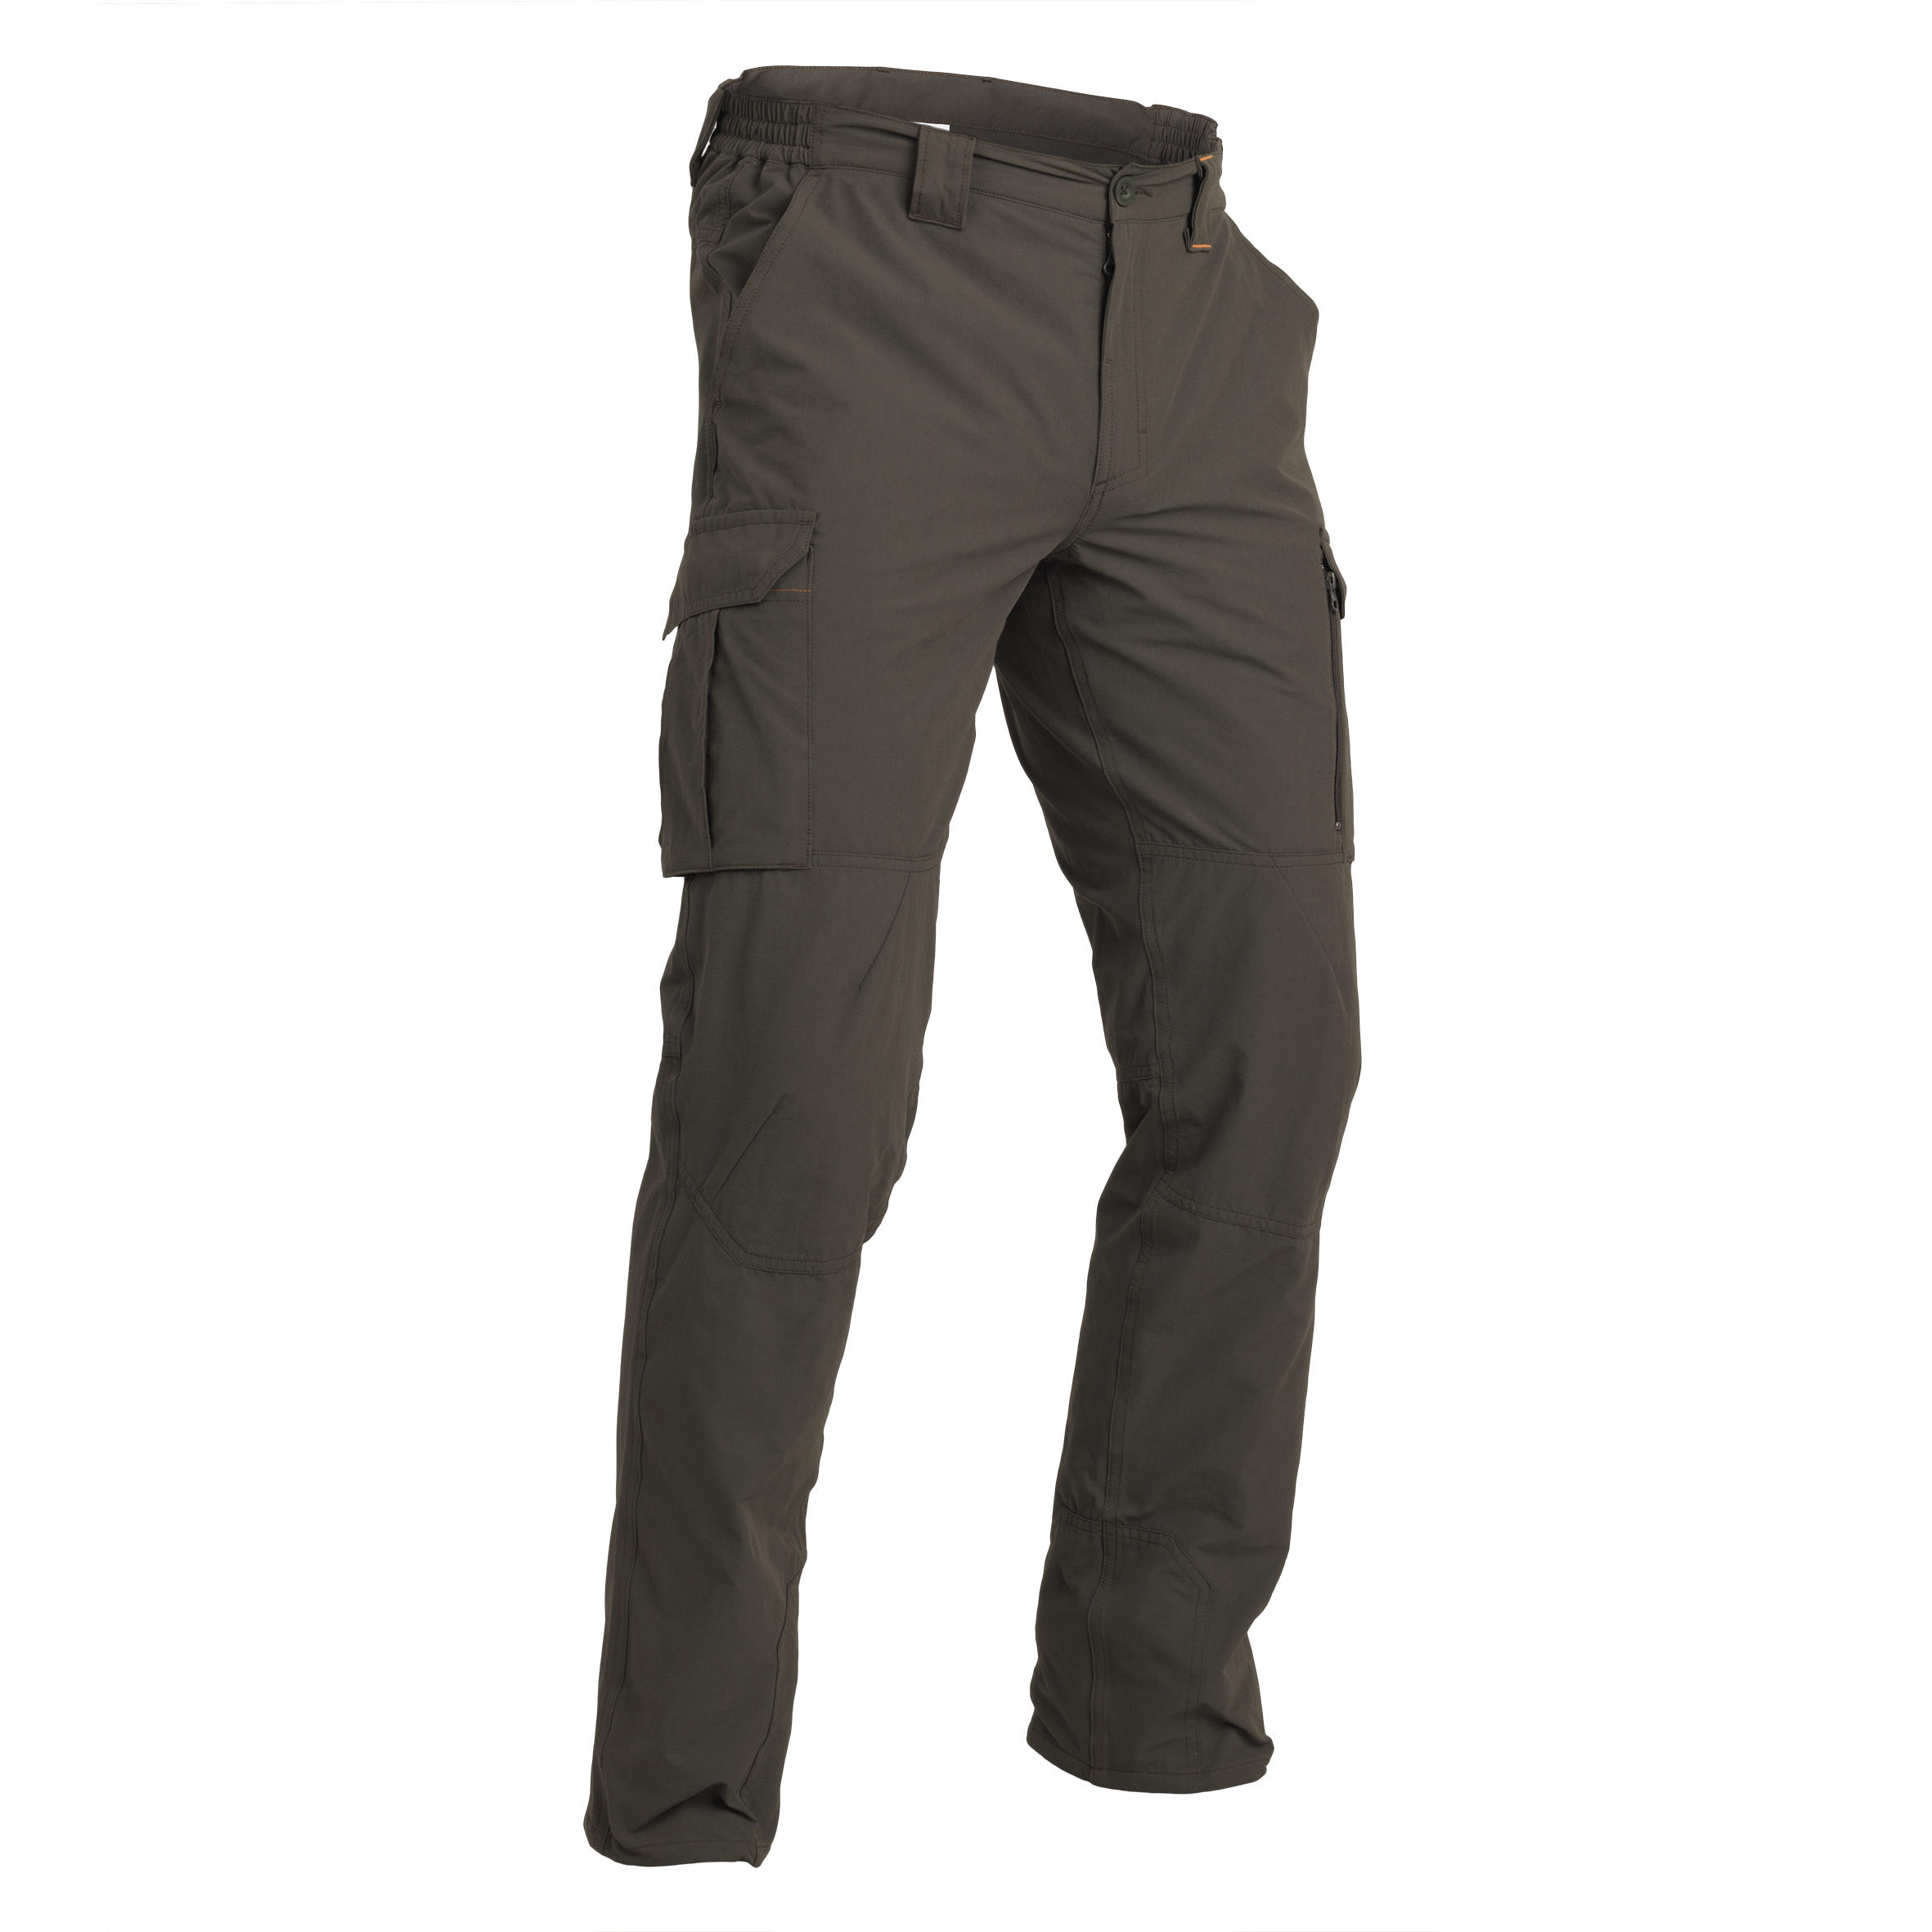 Buy Solognac By Decathlon Men Trousers Pants SG-520 Trousers Green at  Redfynd